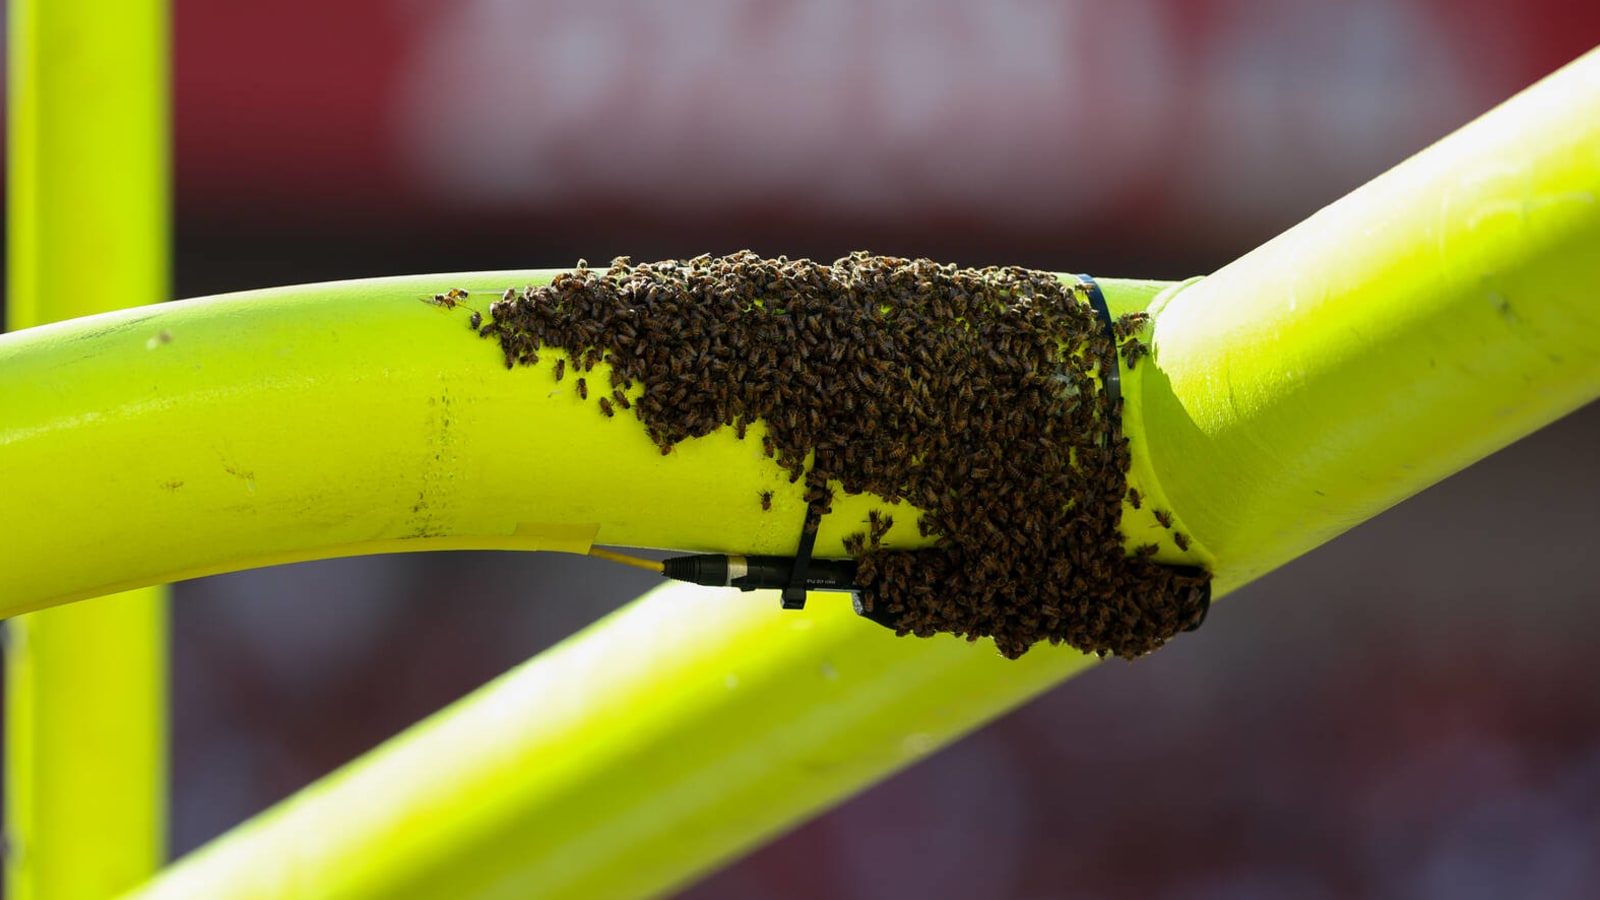 Buccaneers have major bee issue during Sunday’s game